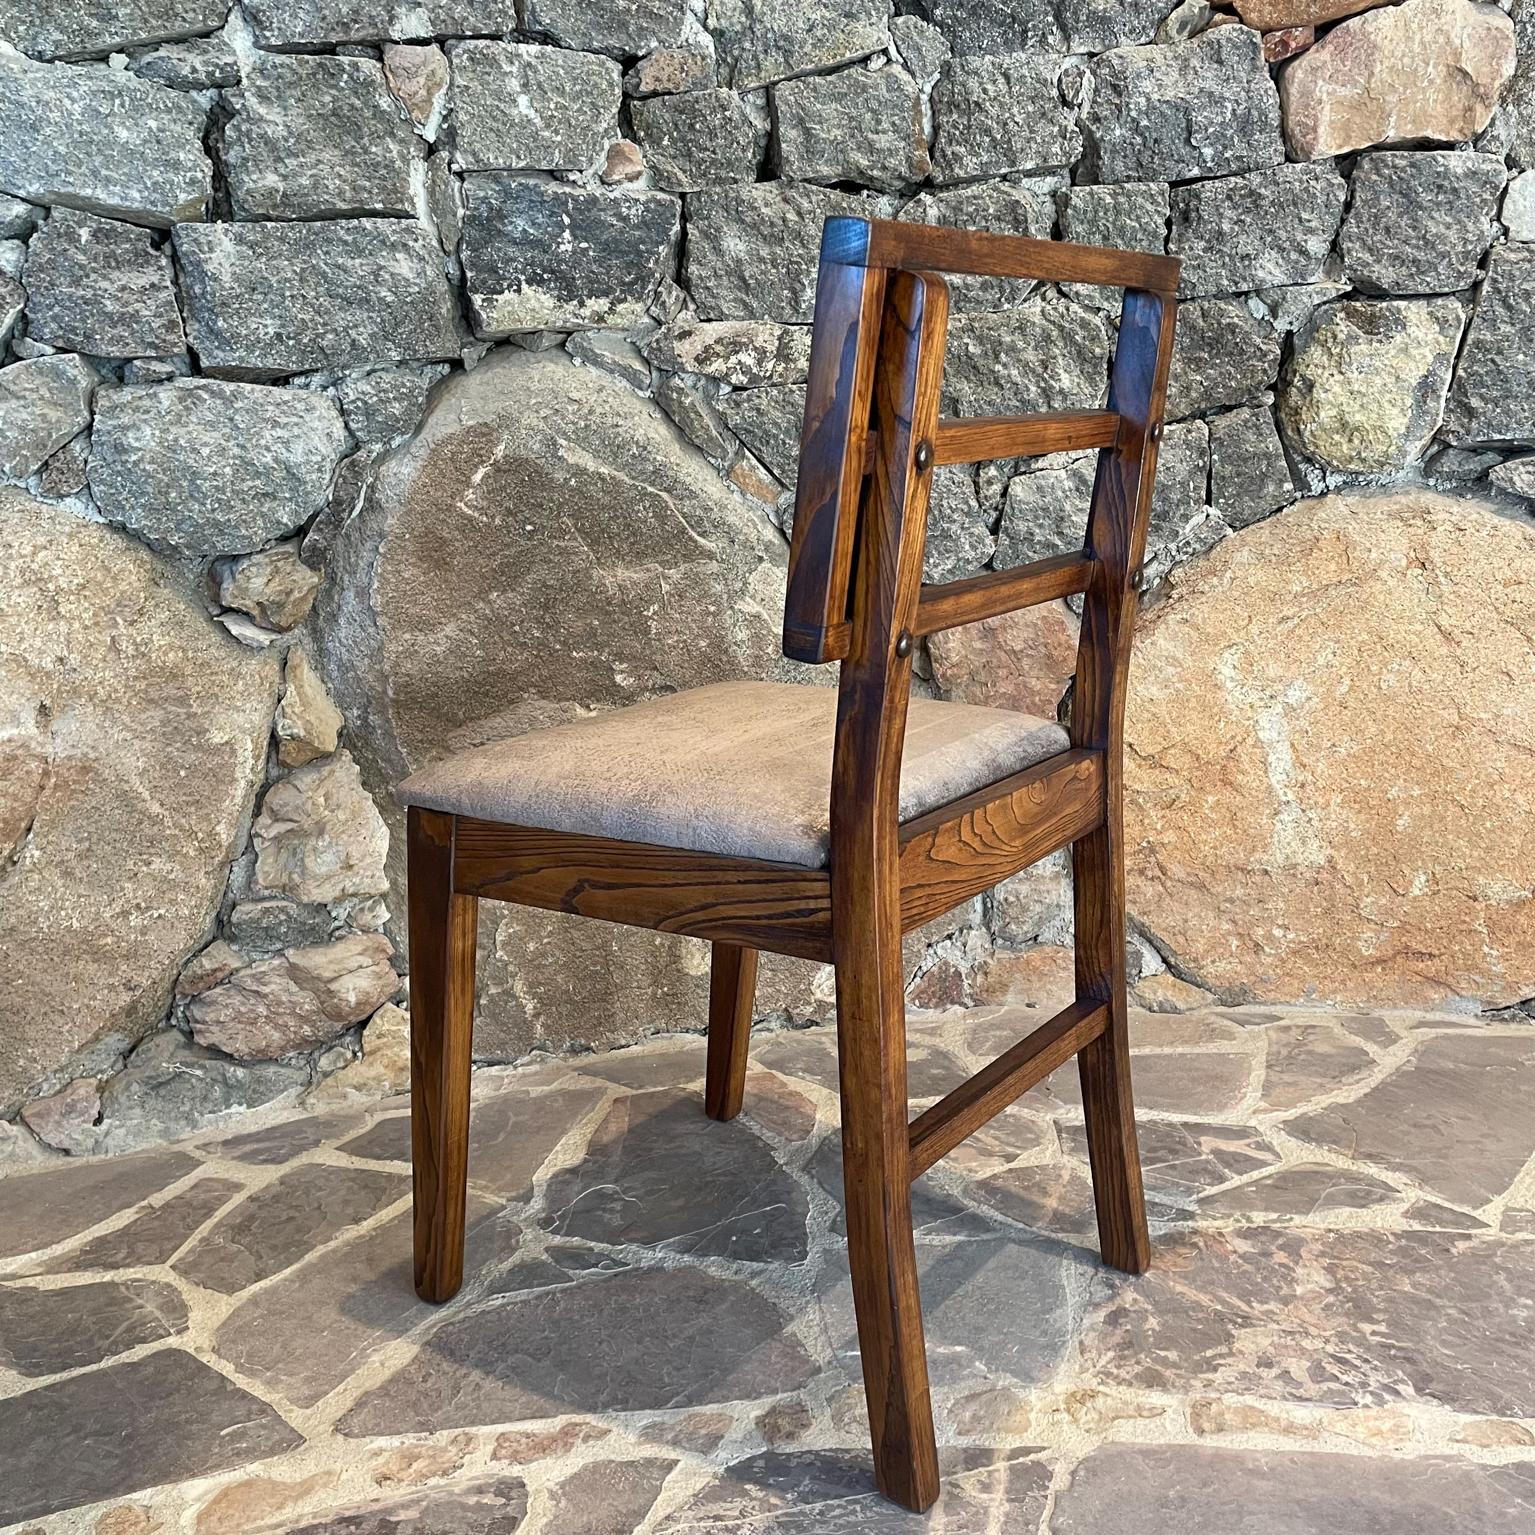 2 Modern Side Chairs in Oak, Style of Paul Laszlo Glenn of Calif 1960s Restored In Good Condition For Sale In Chula Vista, CA